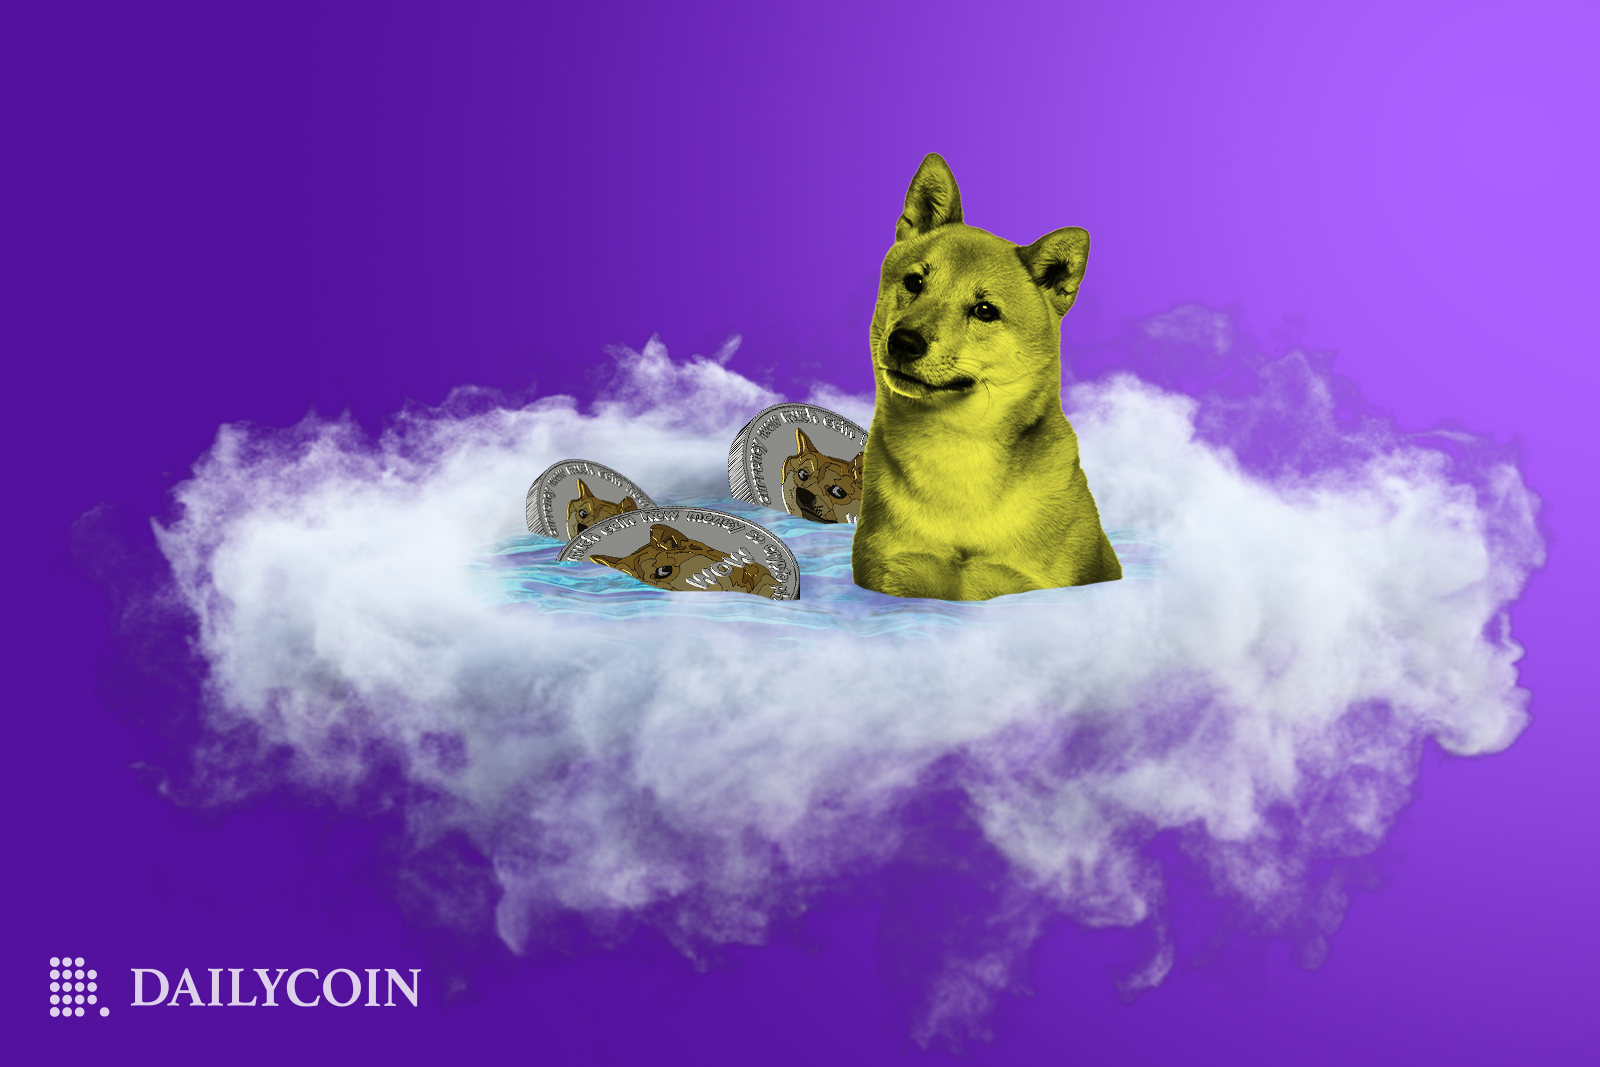 Dogecoin (DOGE) Foundation Raises $5M DOGE Core Fund - Here’s What’s Next